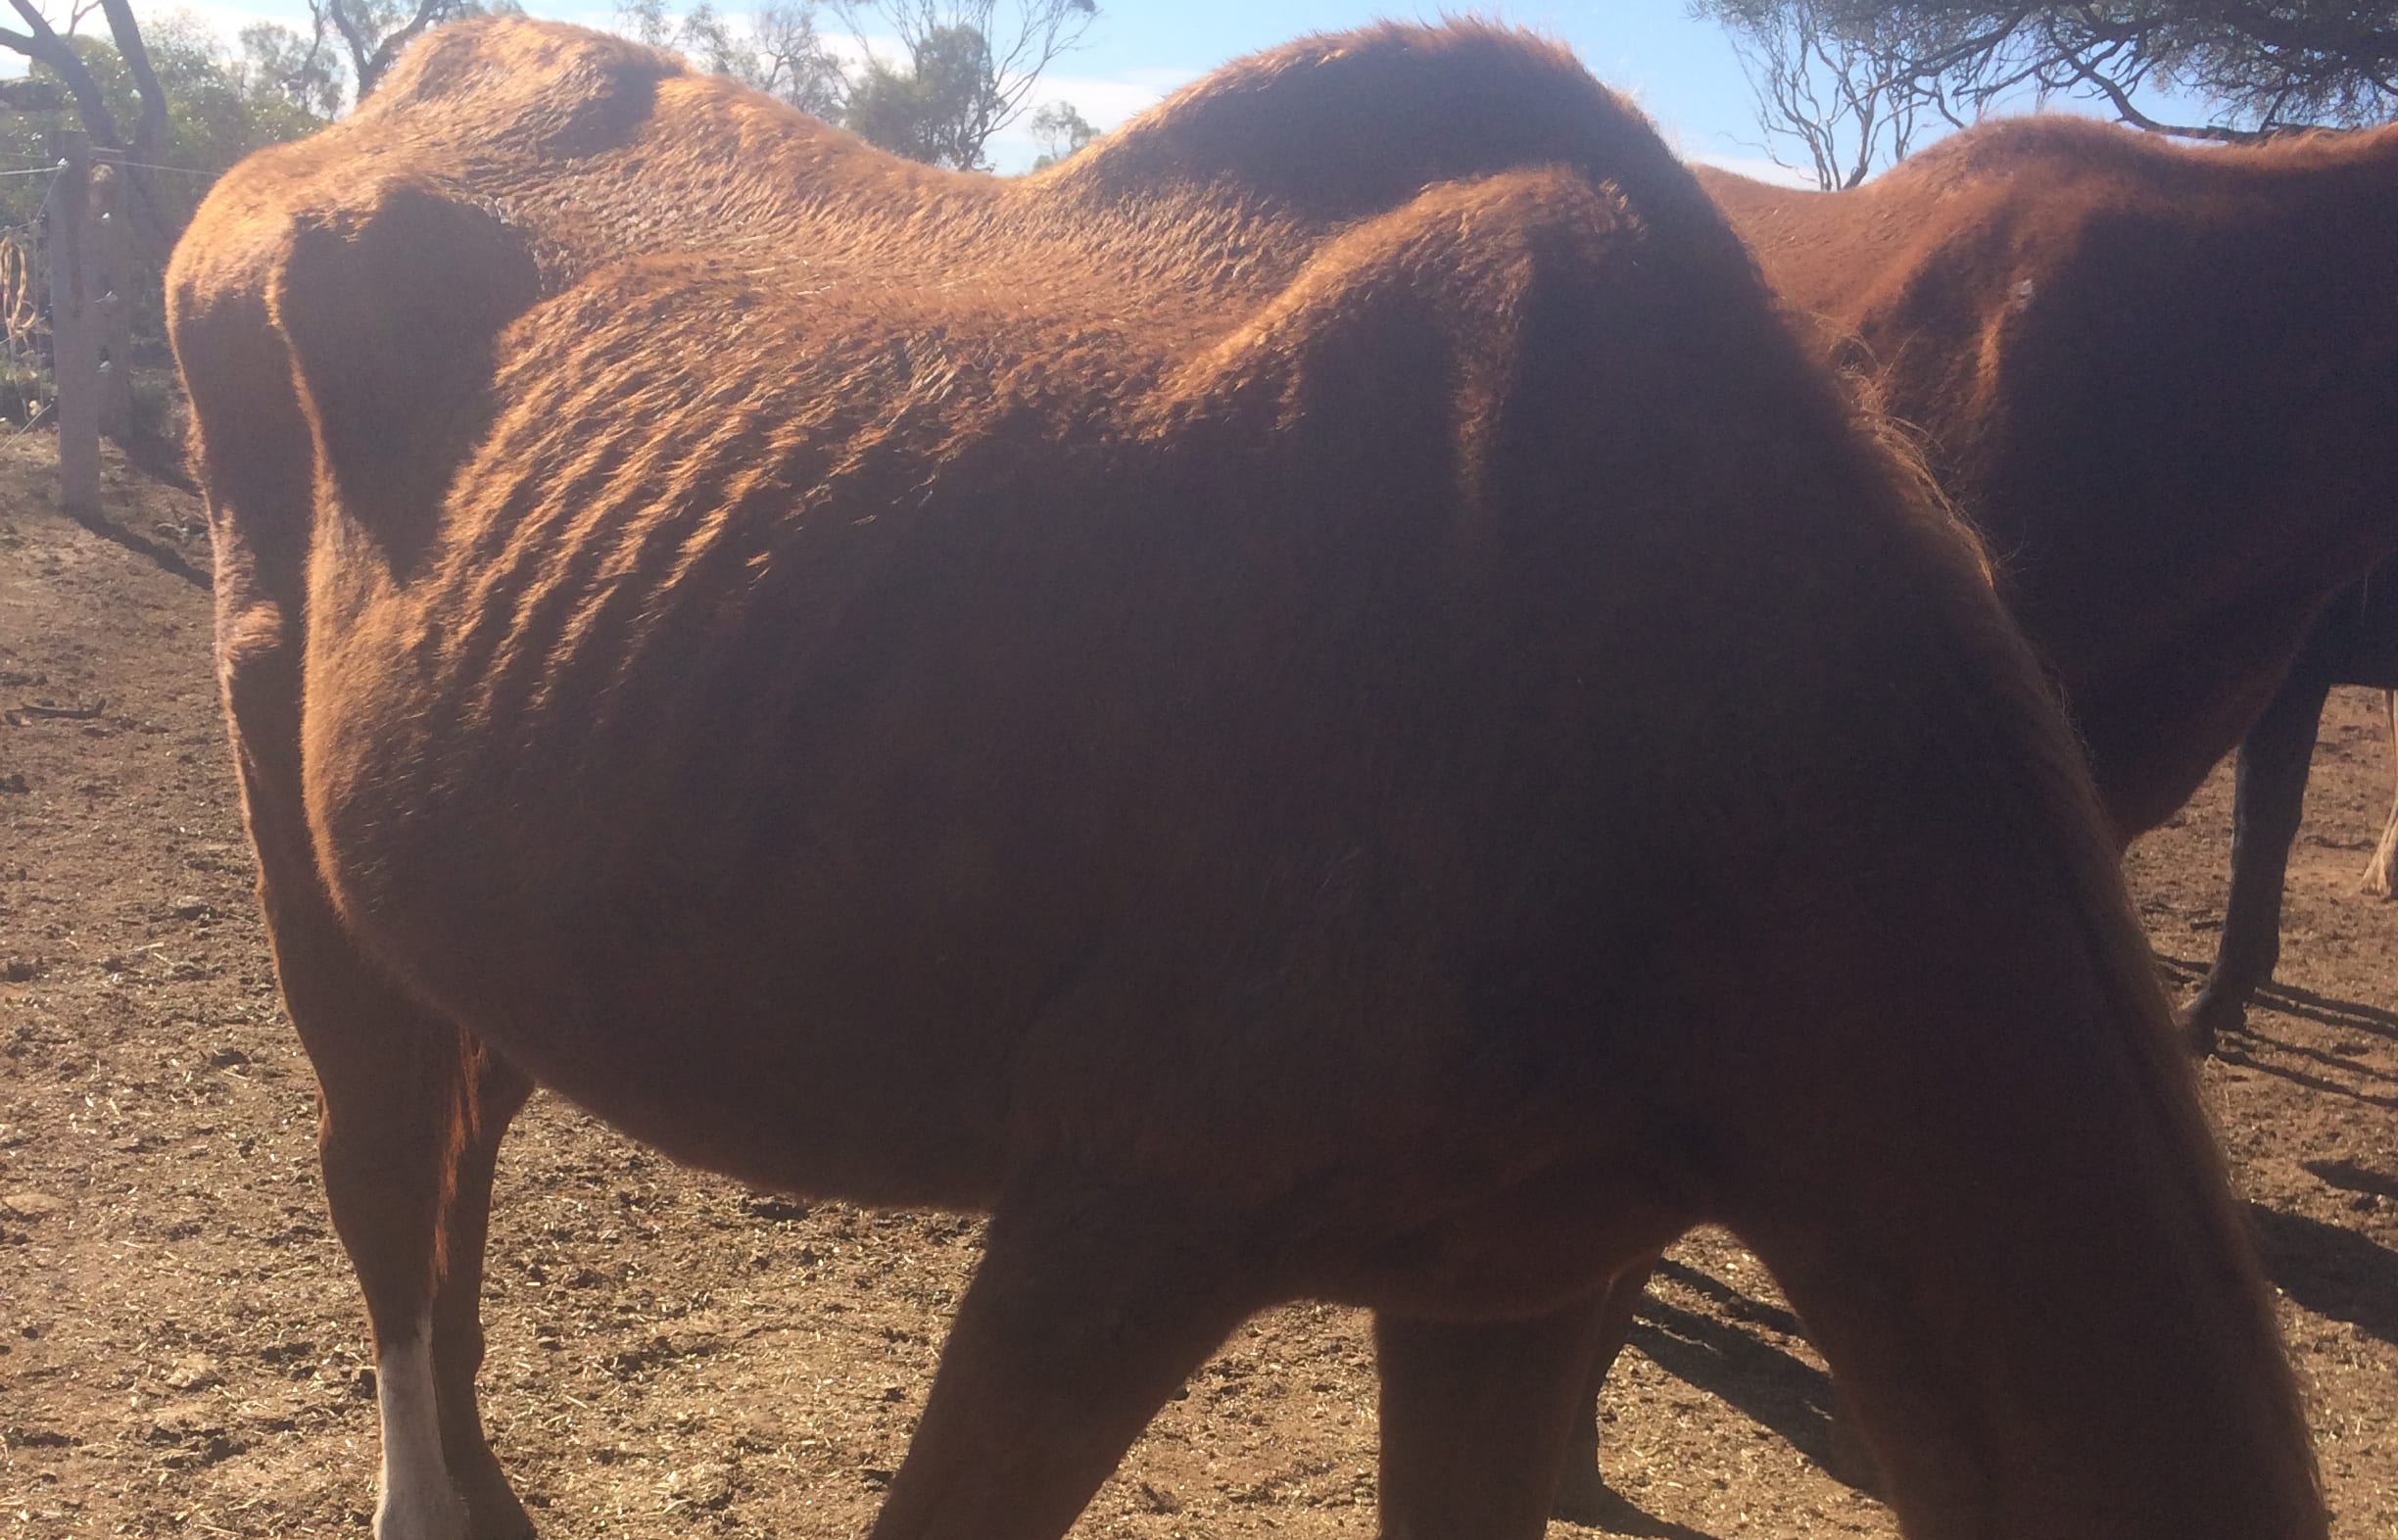 Indigo Violet was found to be 140kg underweight at the Baroota property, according to a veterinary report.